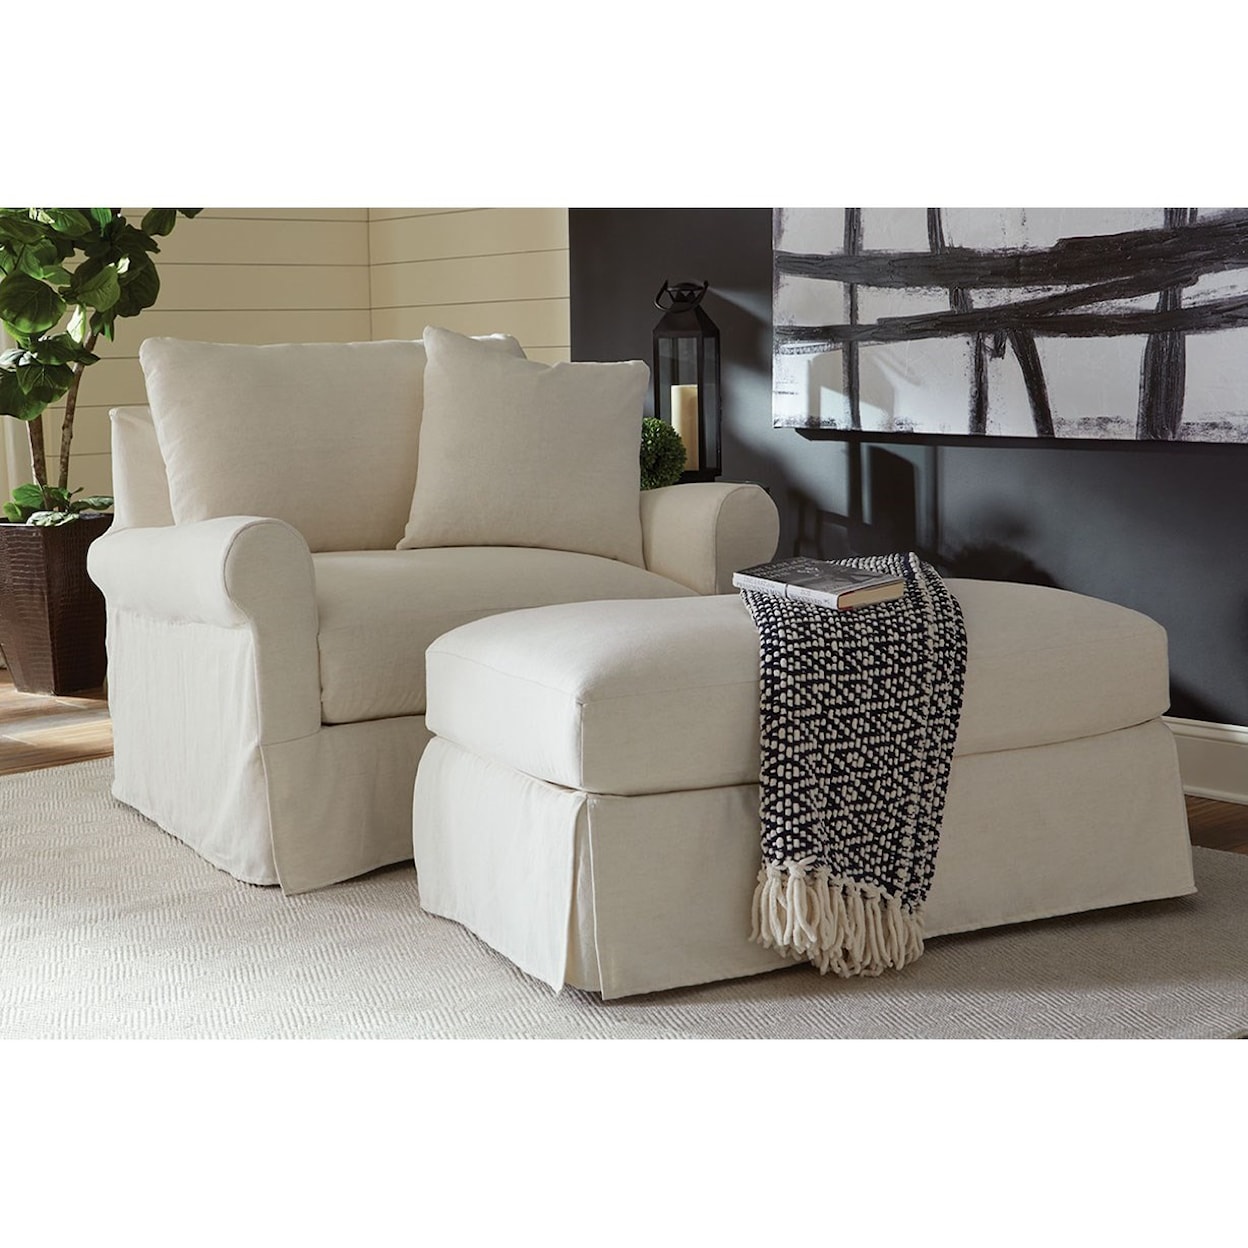 Rowe Aberdeen Slipcovered Chair and Ottoman